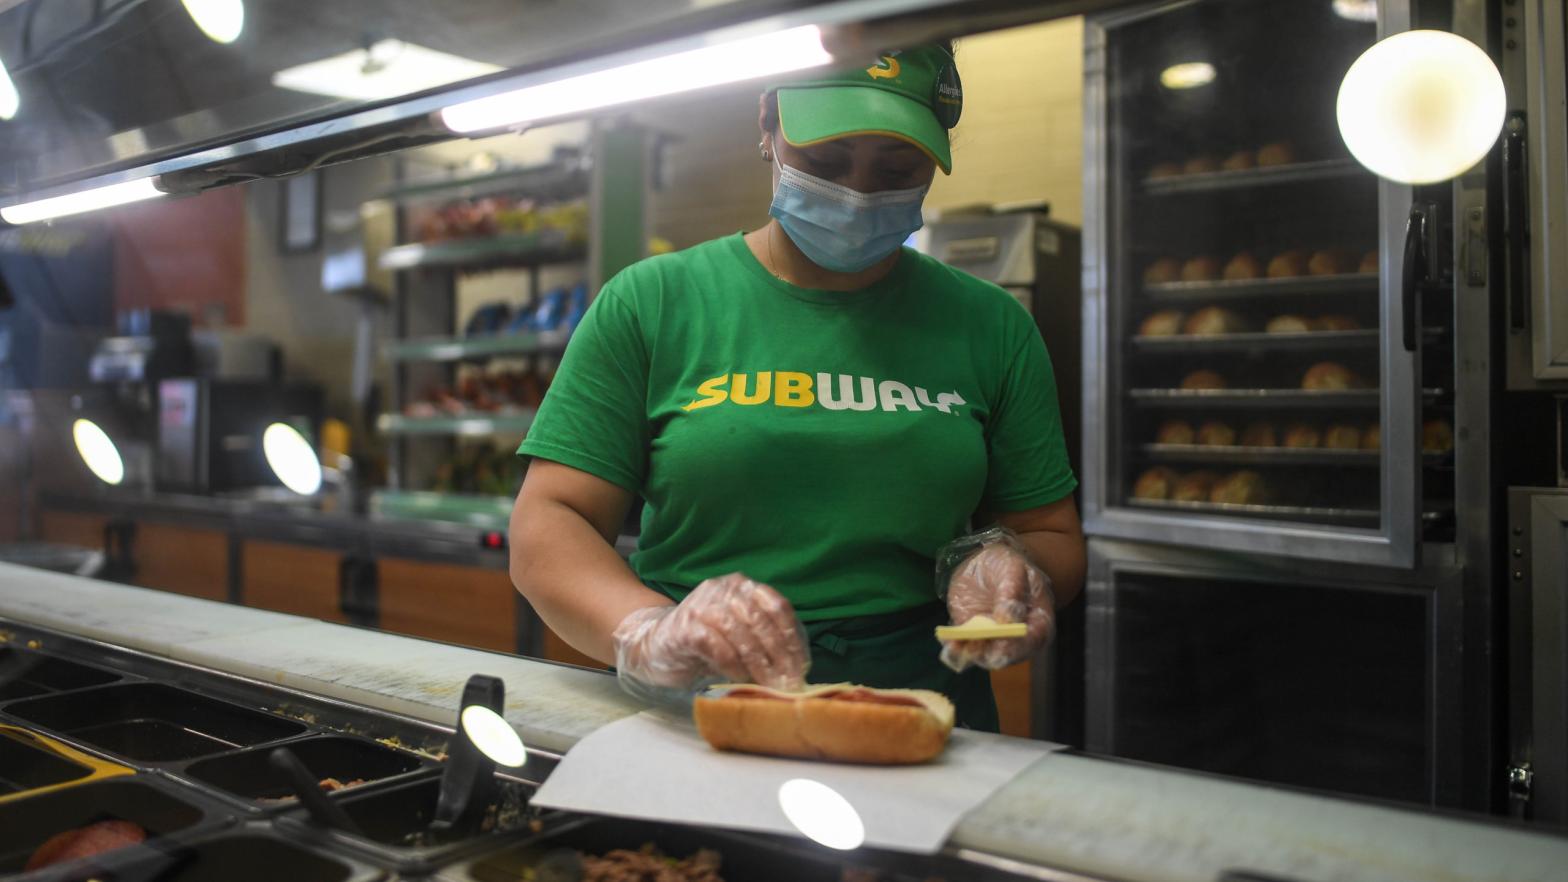 A worker wears a face mask while making a sandwich in a Subway store on June 12, 2020 in London, England. (Photo: Peter Summers, Getty Images)